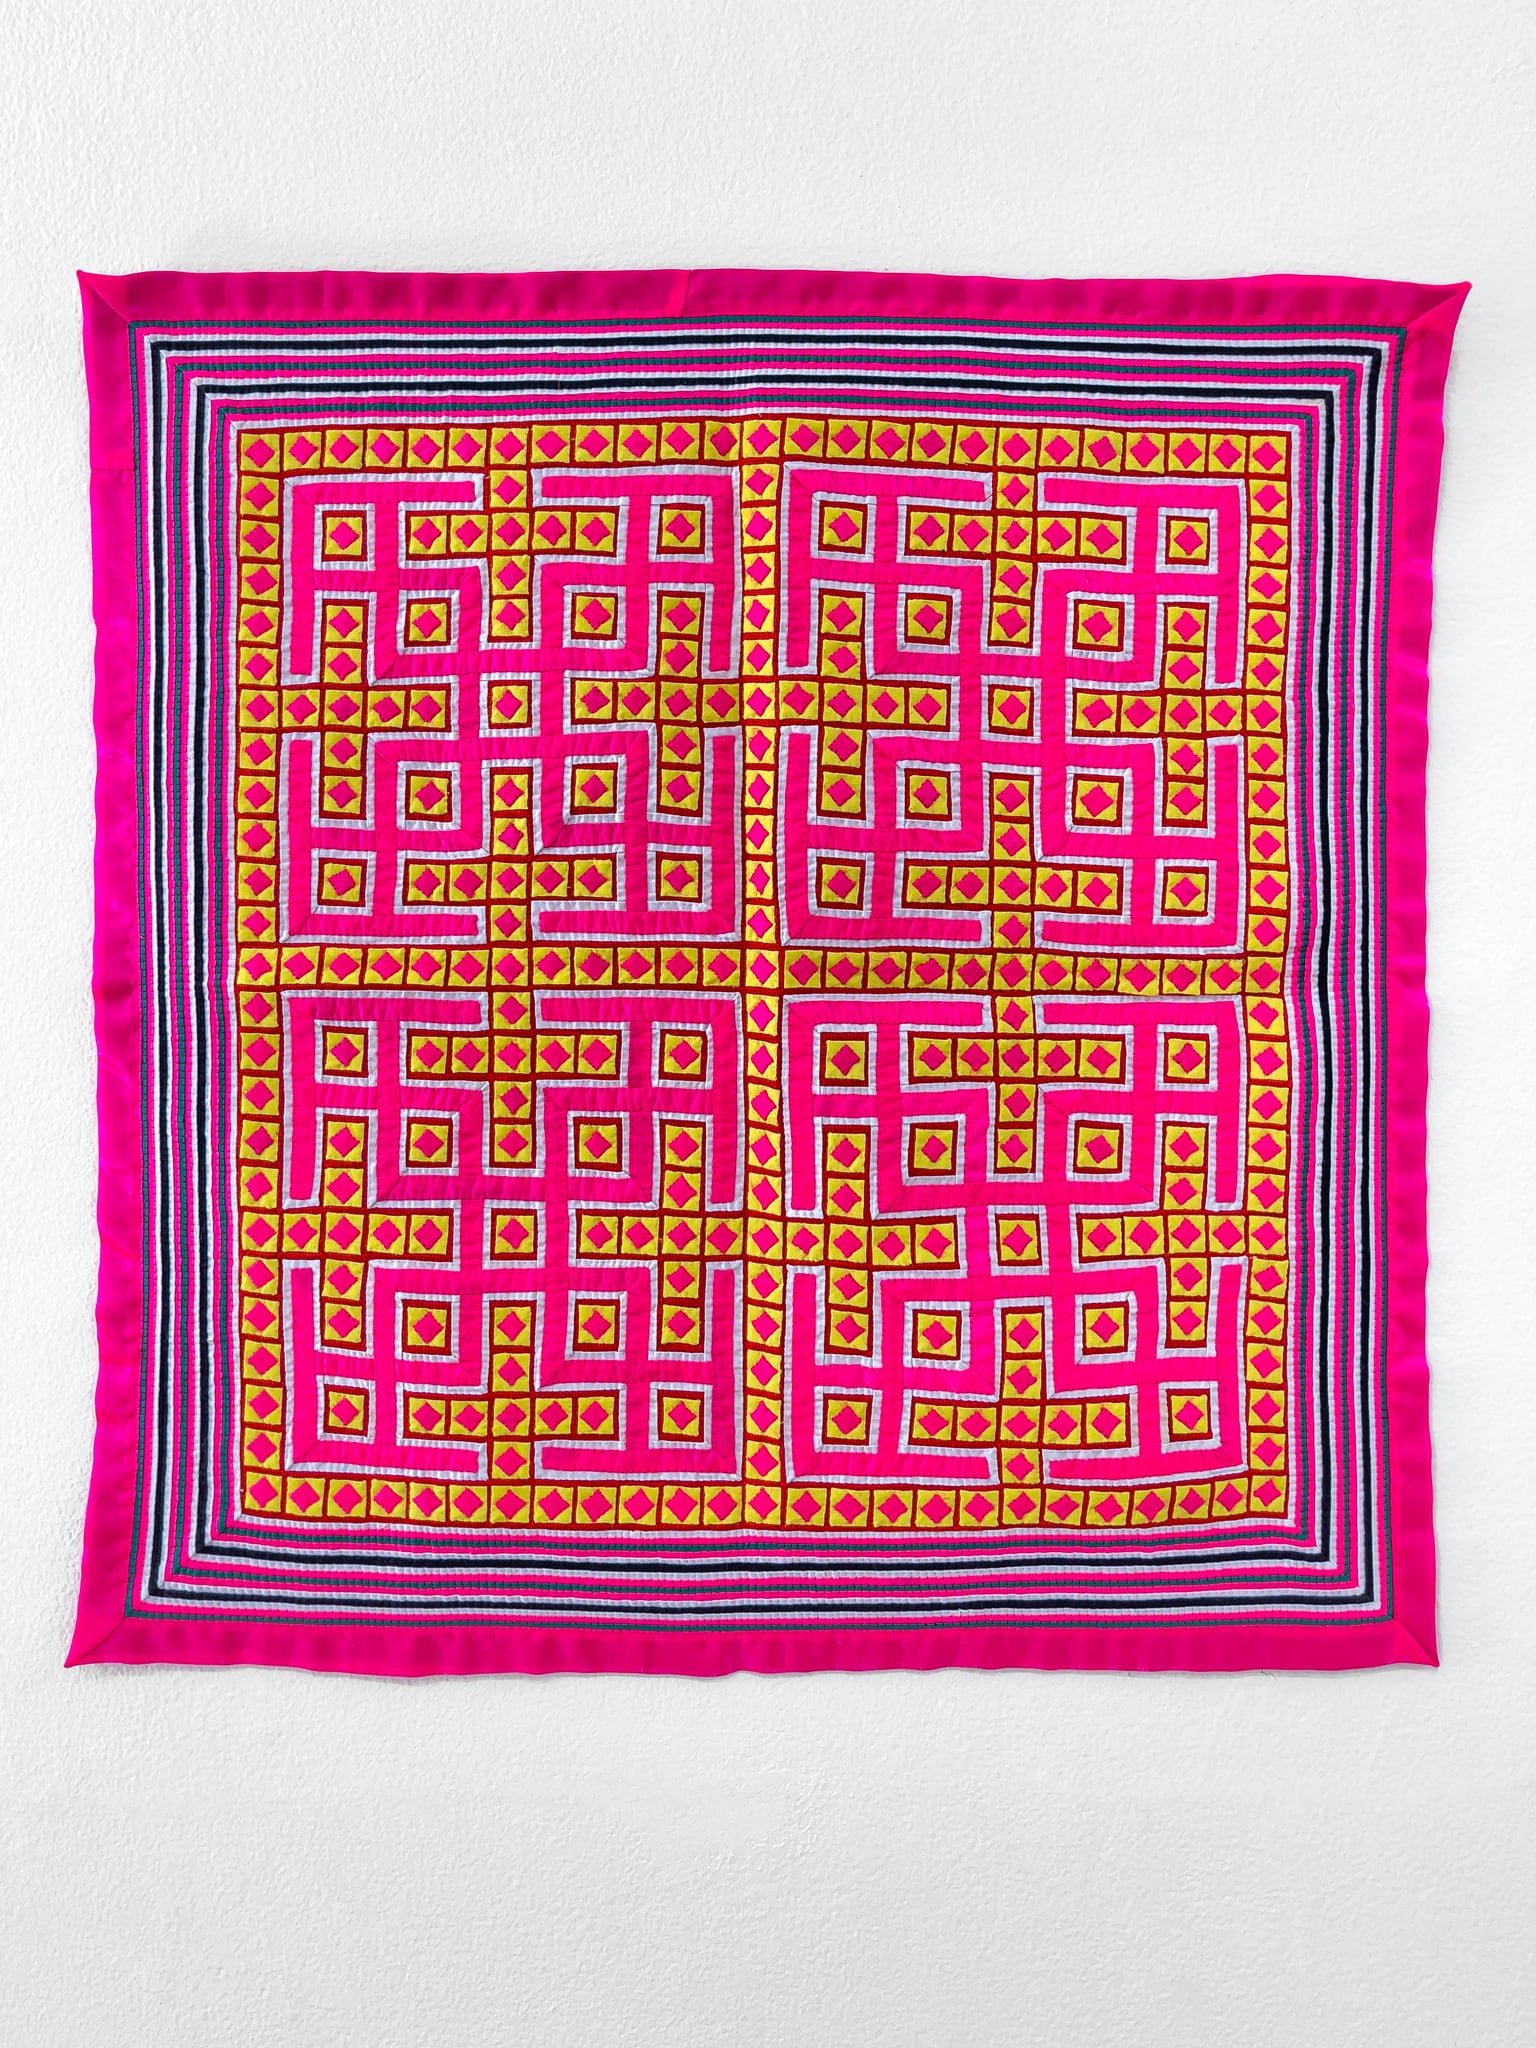 Suzanne Thao, Pillow Case For Hmong Elders, Craft in America